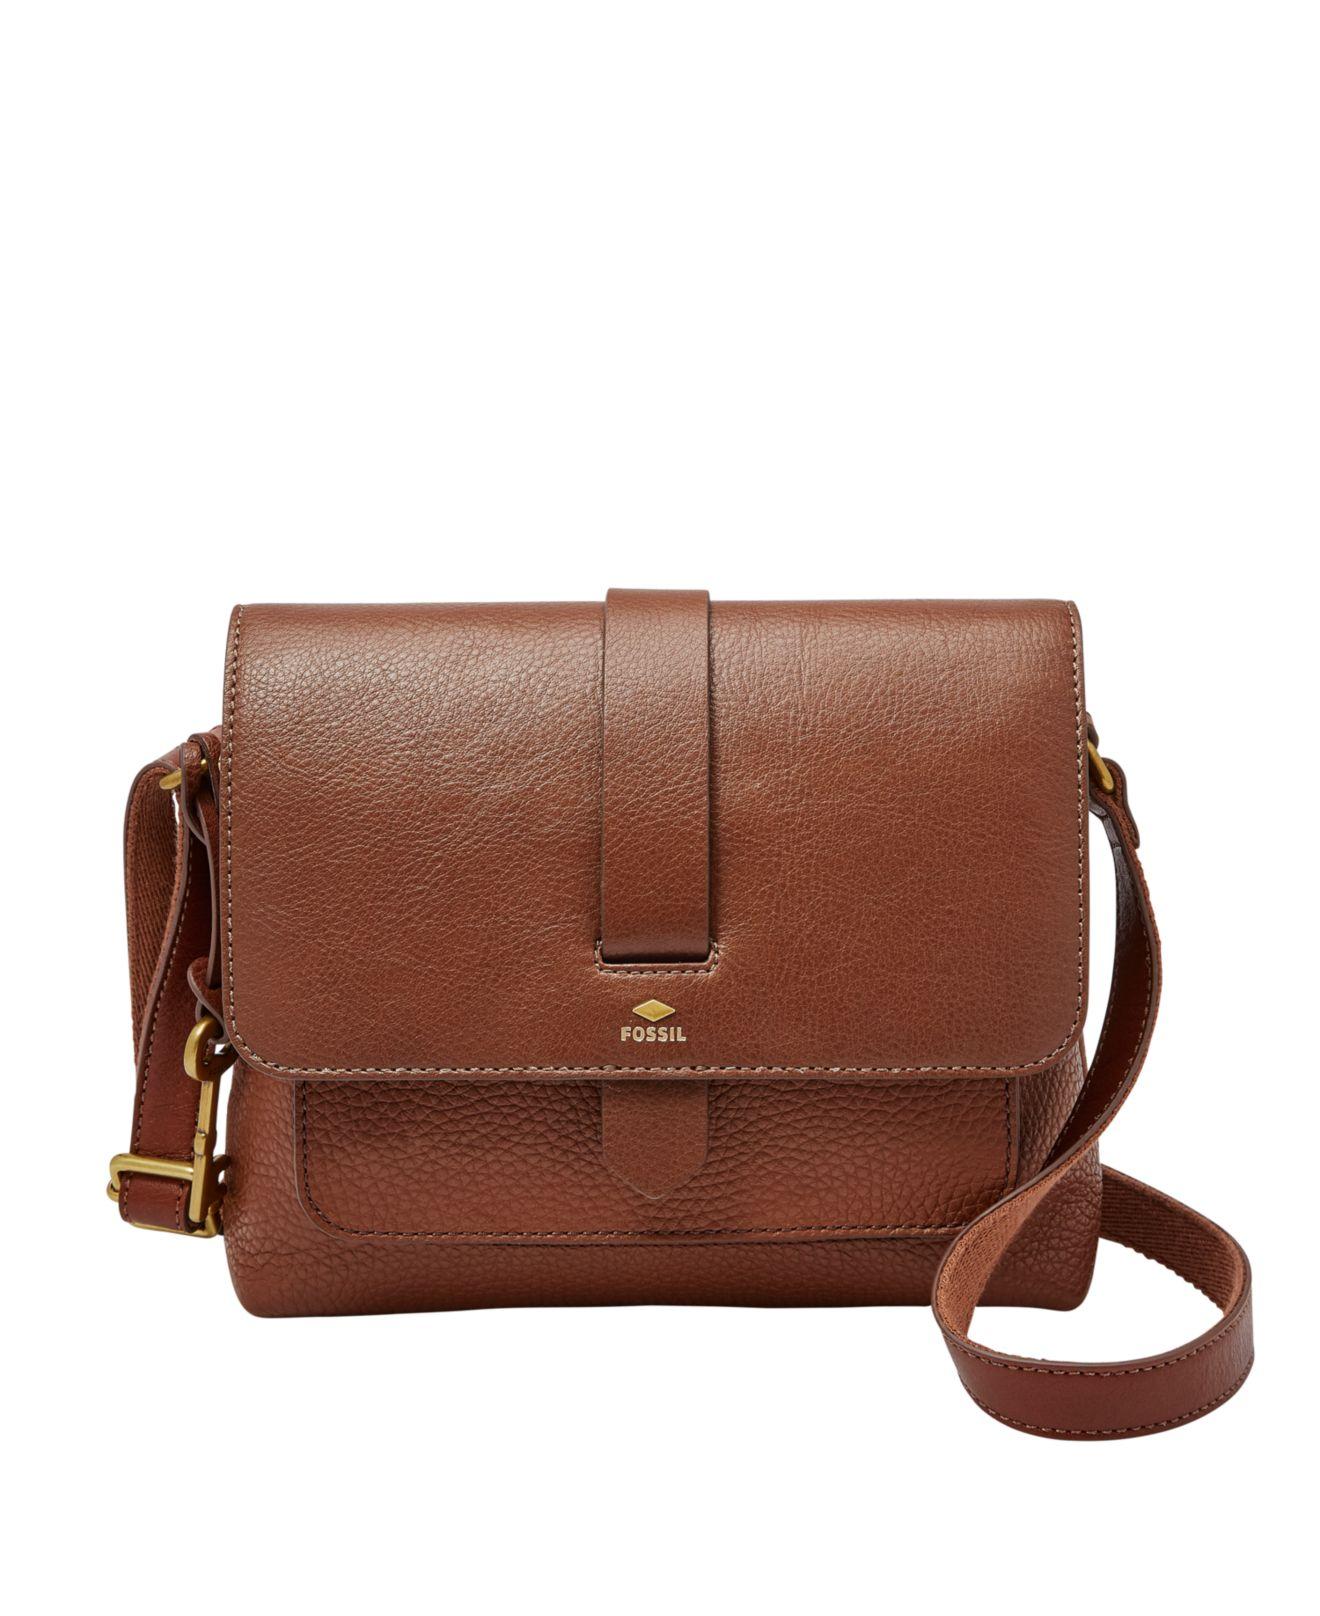 Fossil Kinley Small Leather Crossbody in Brown/Gold (Brown) - Lyst